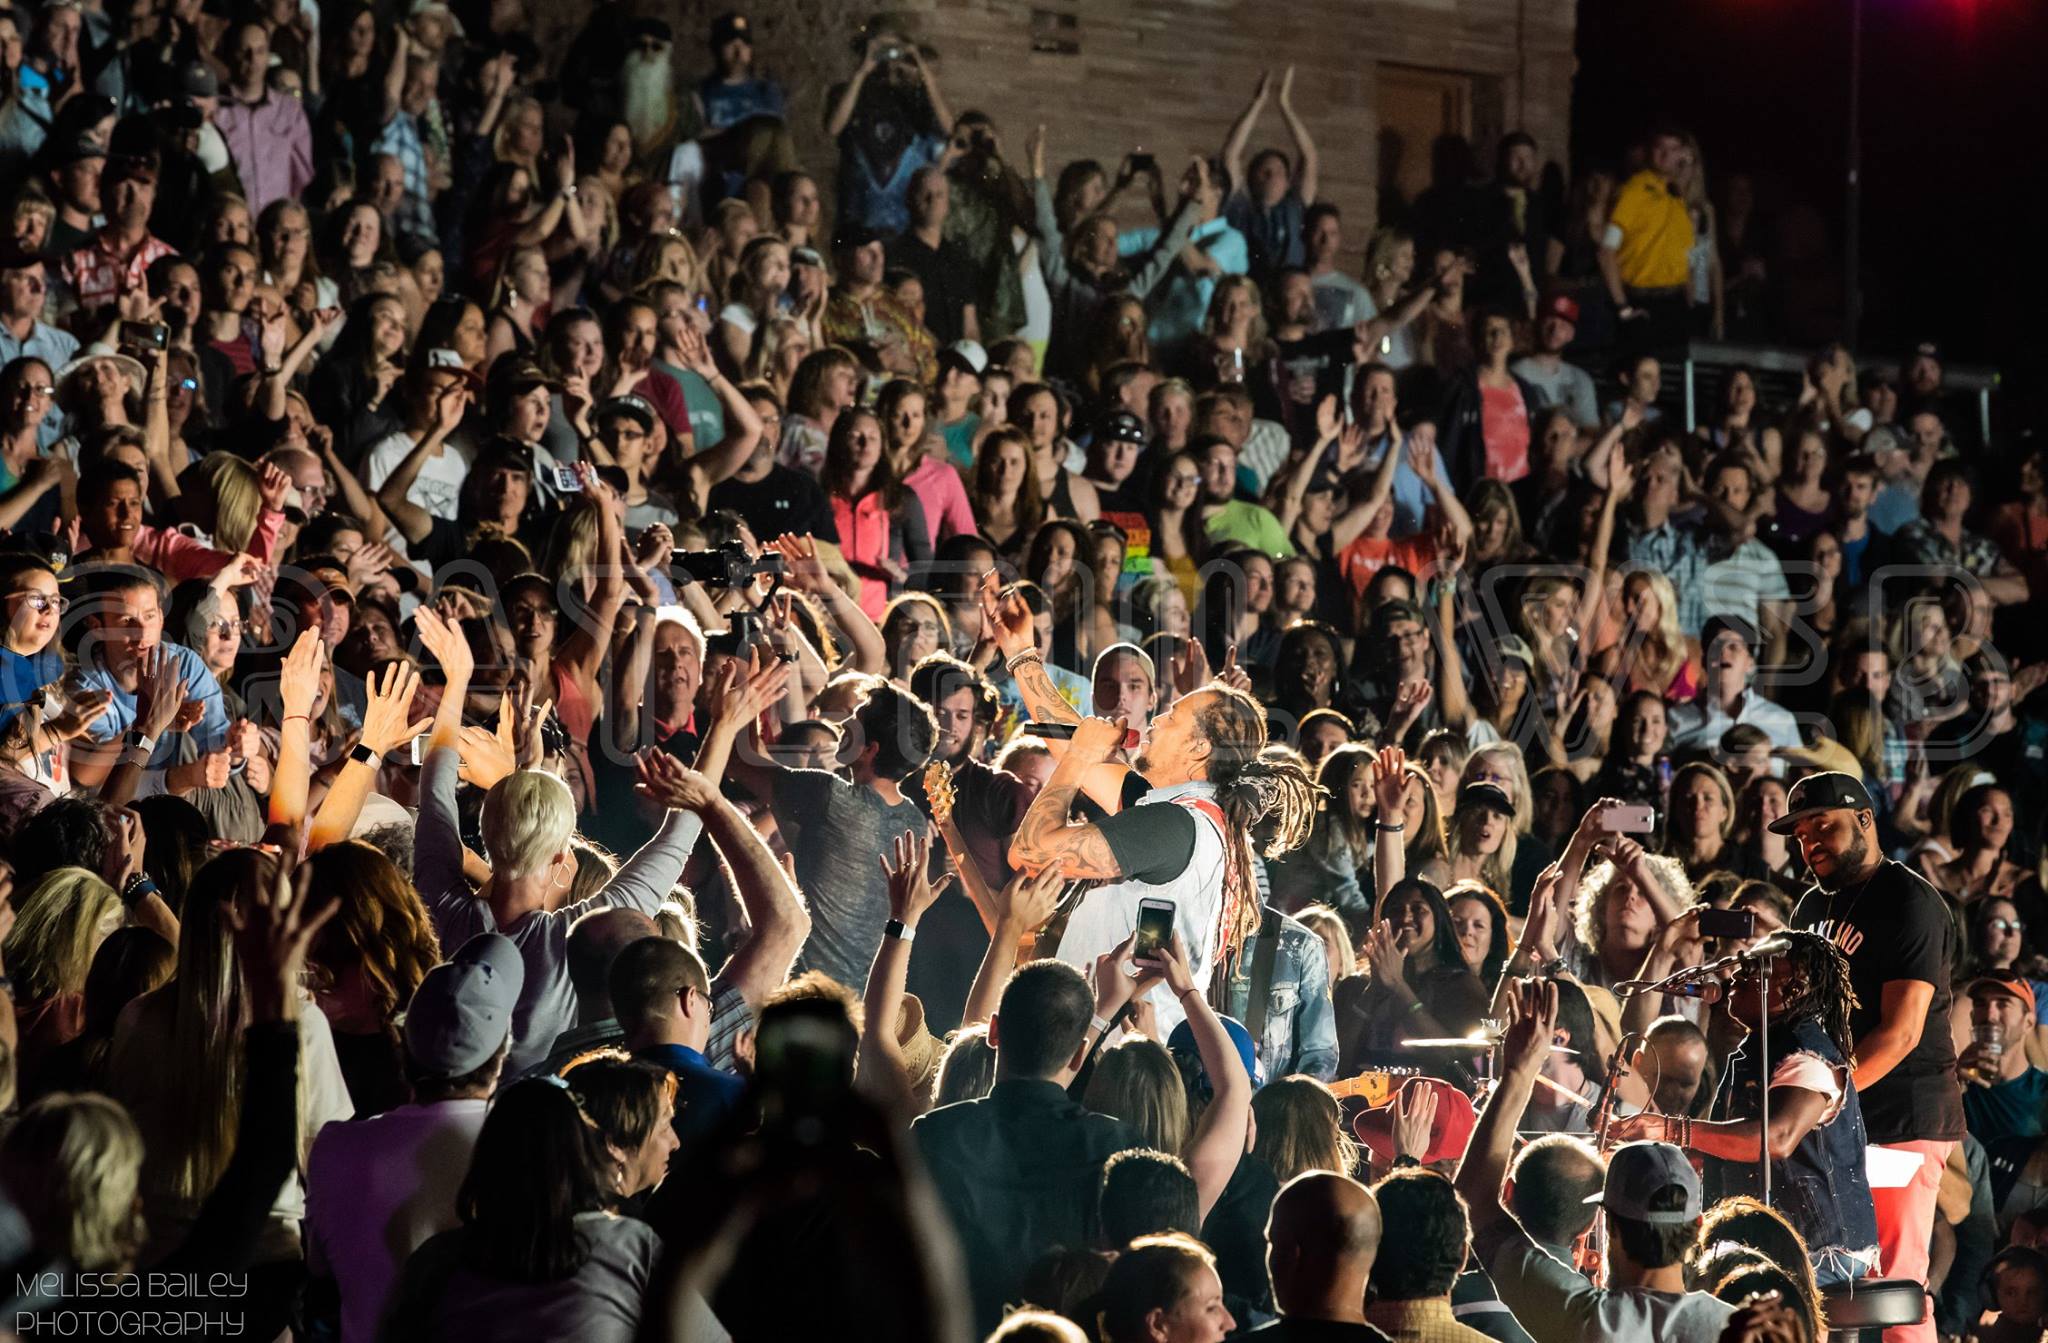 Michael Franti with the Red Rocks crowd - photos by Melissa Bailey